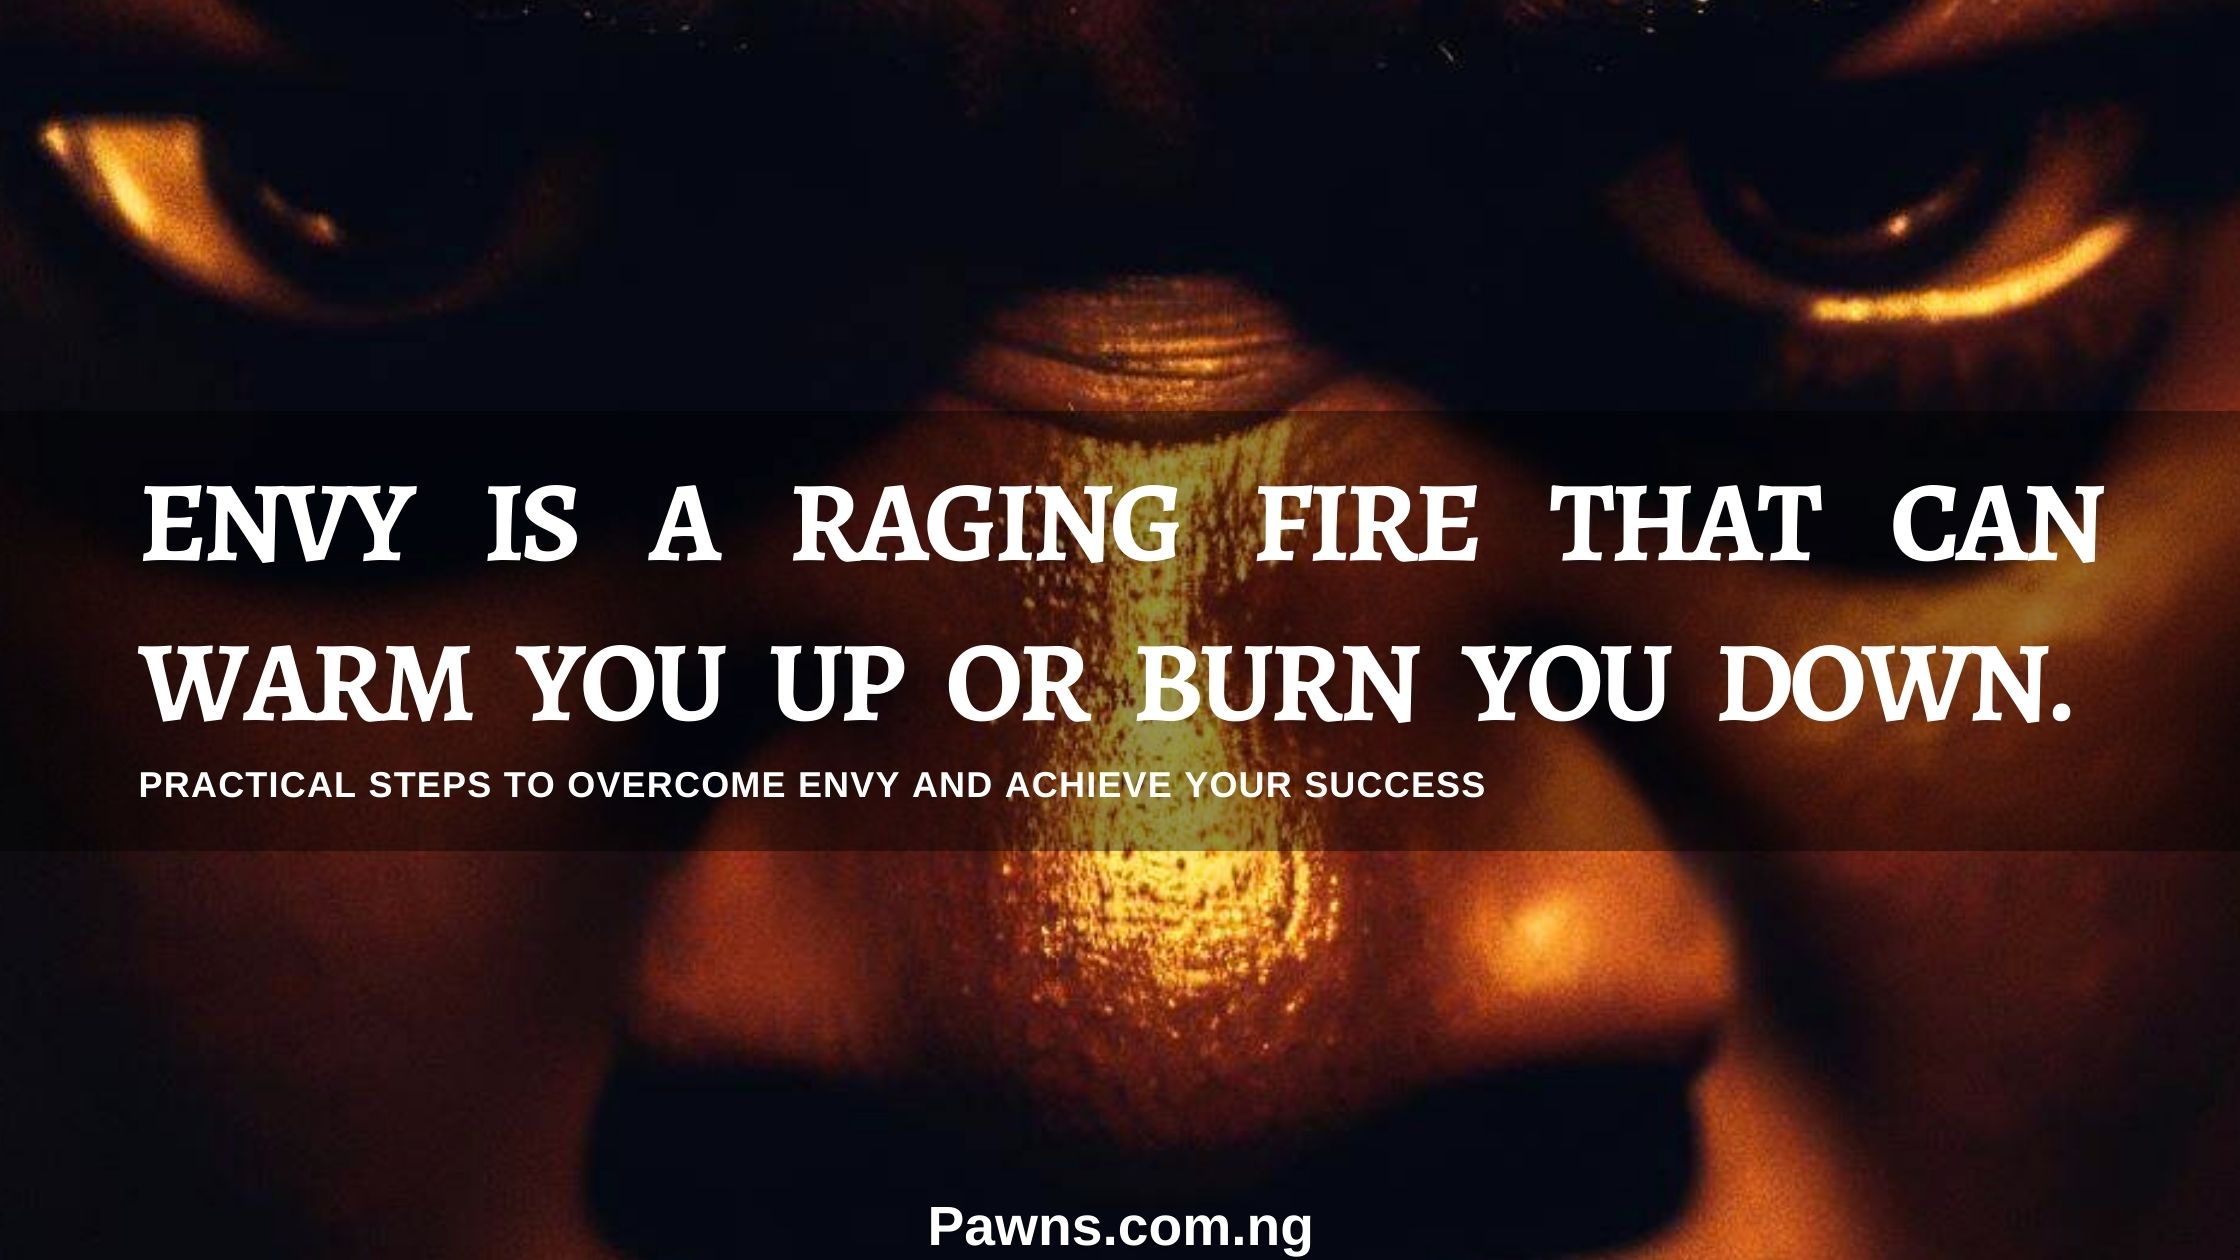 Envy is a raging fire that can warm you up or burn you down. Practical Steps To Overcome Envy and Achieve Your Success